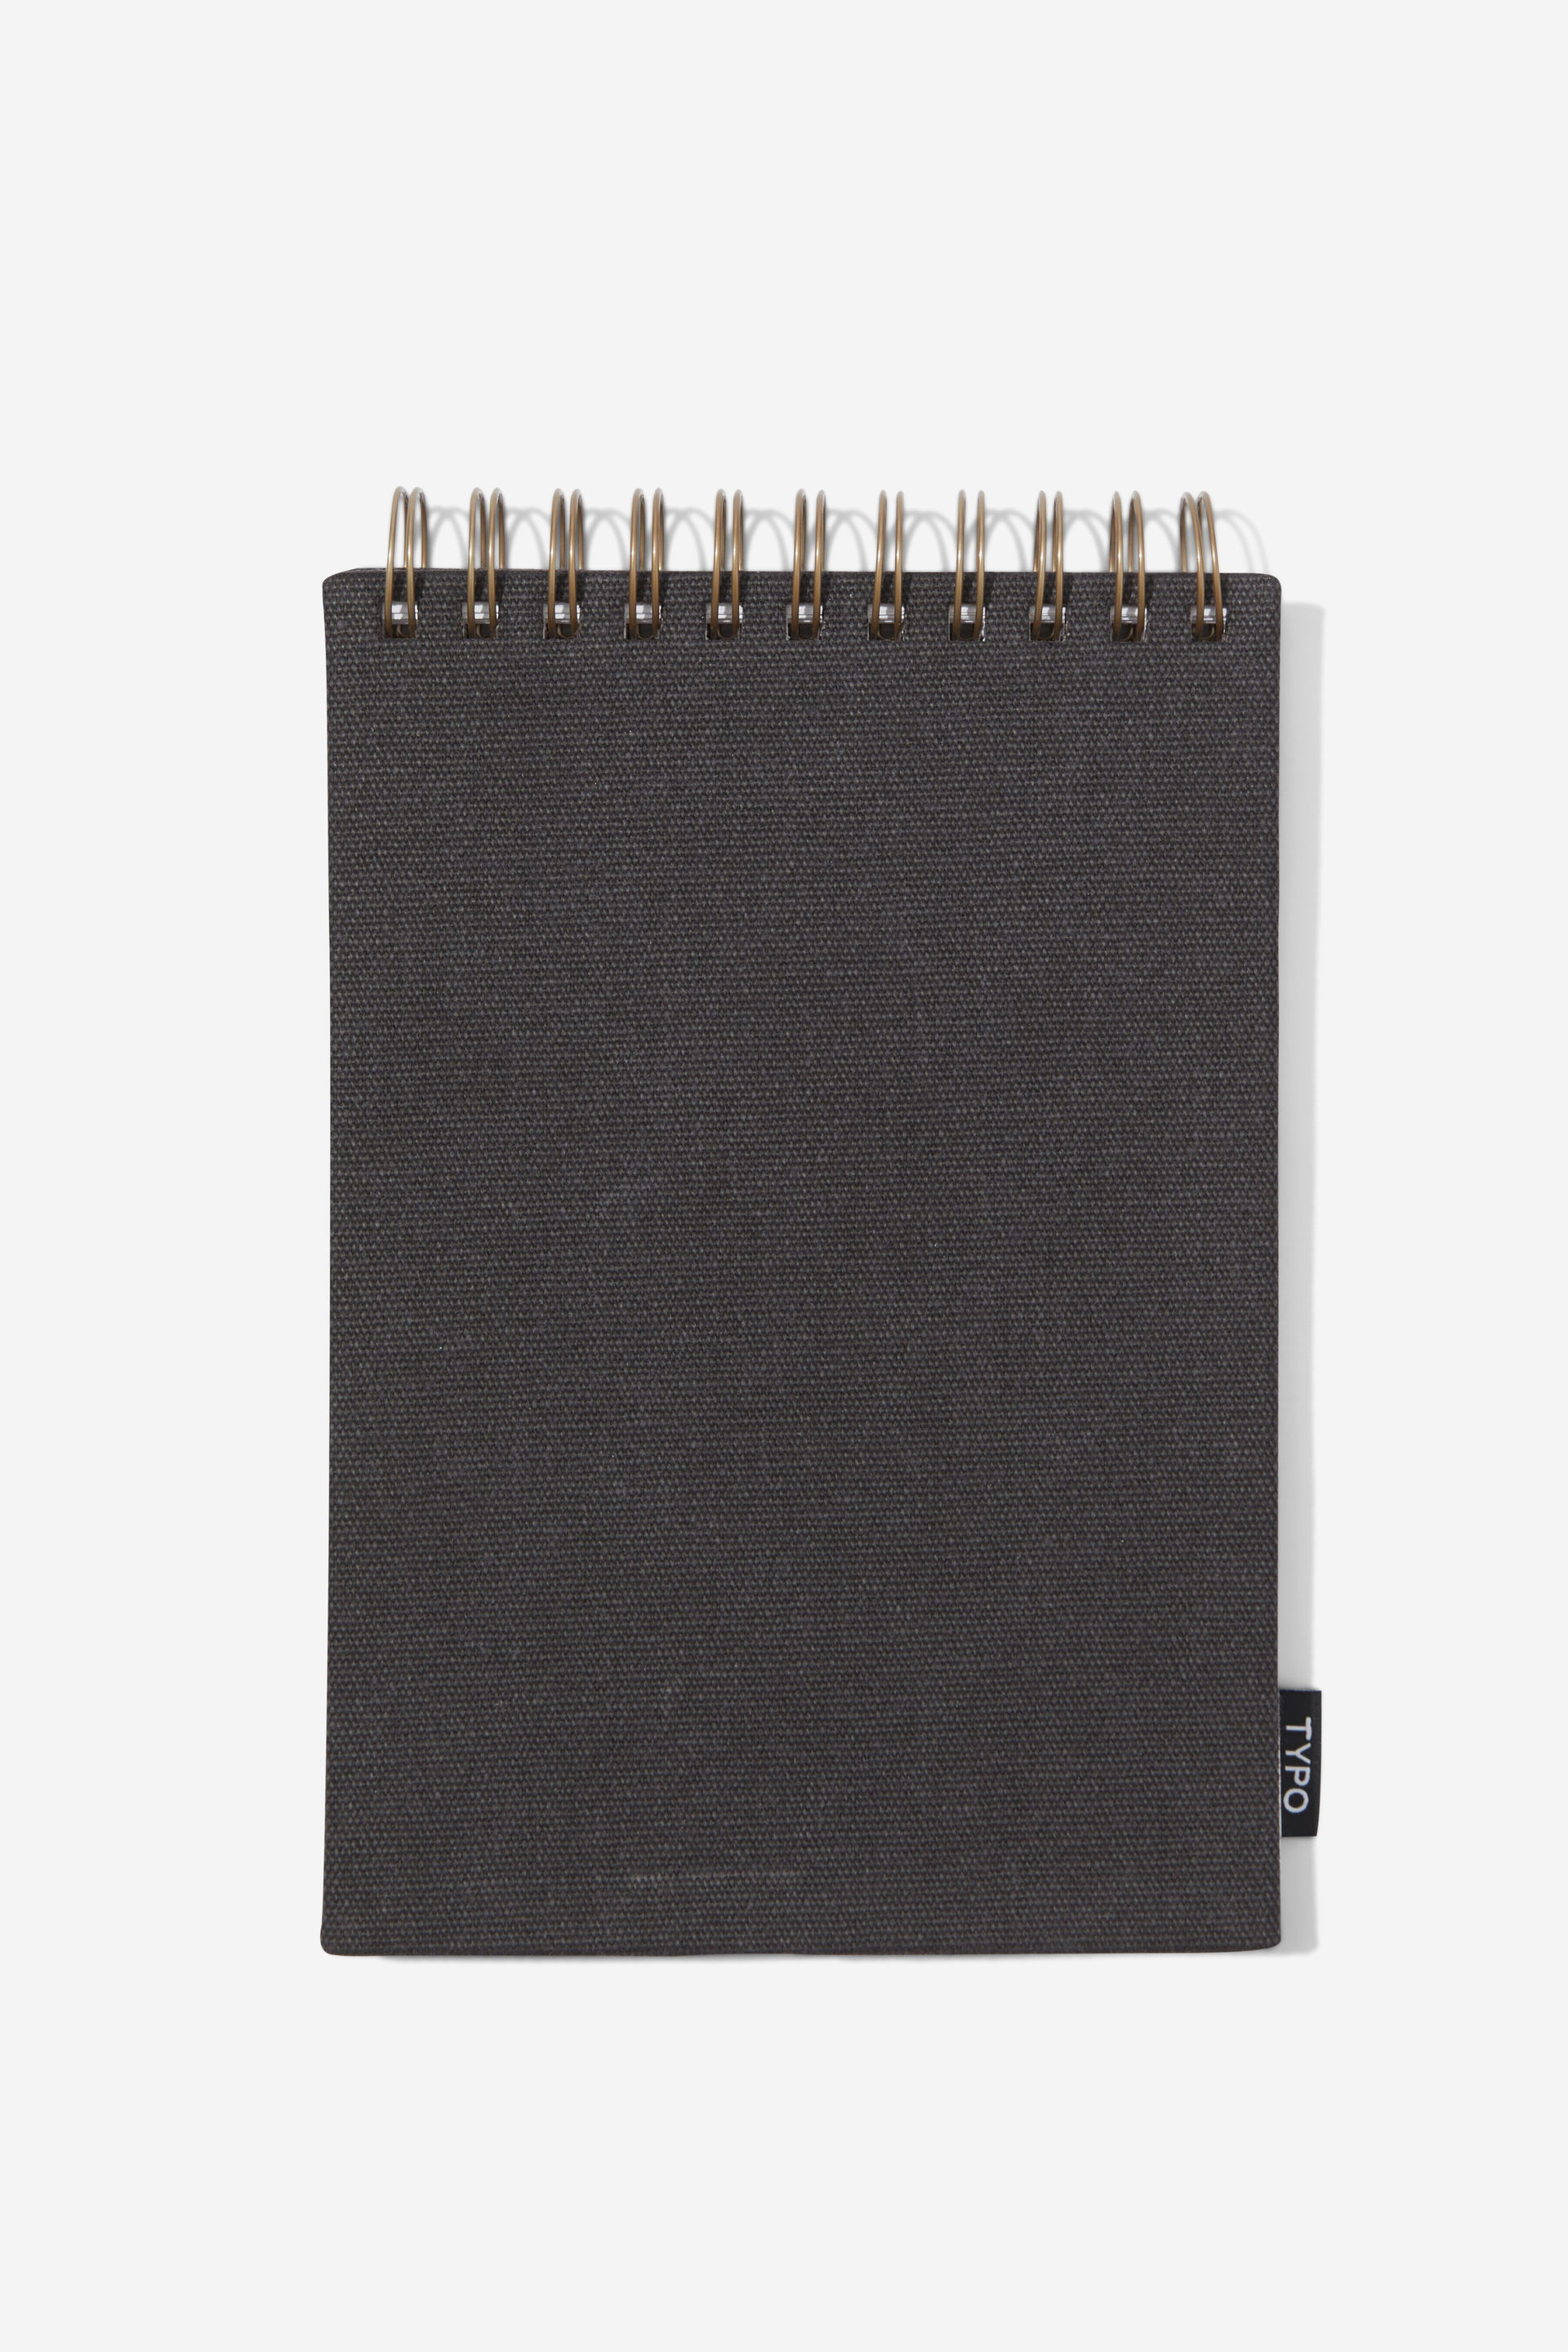 A5 Classic Ivory Hardback Spiral Bound Sketchbook – Ashton and Wright